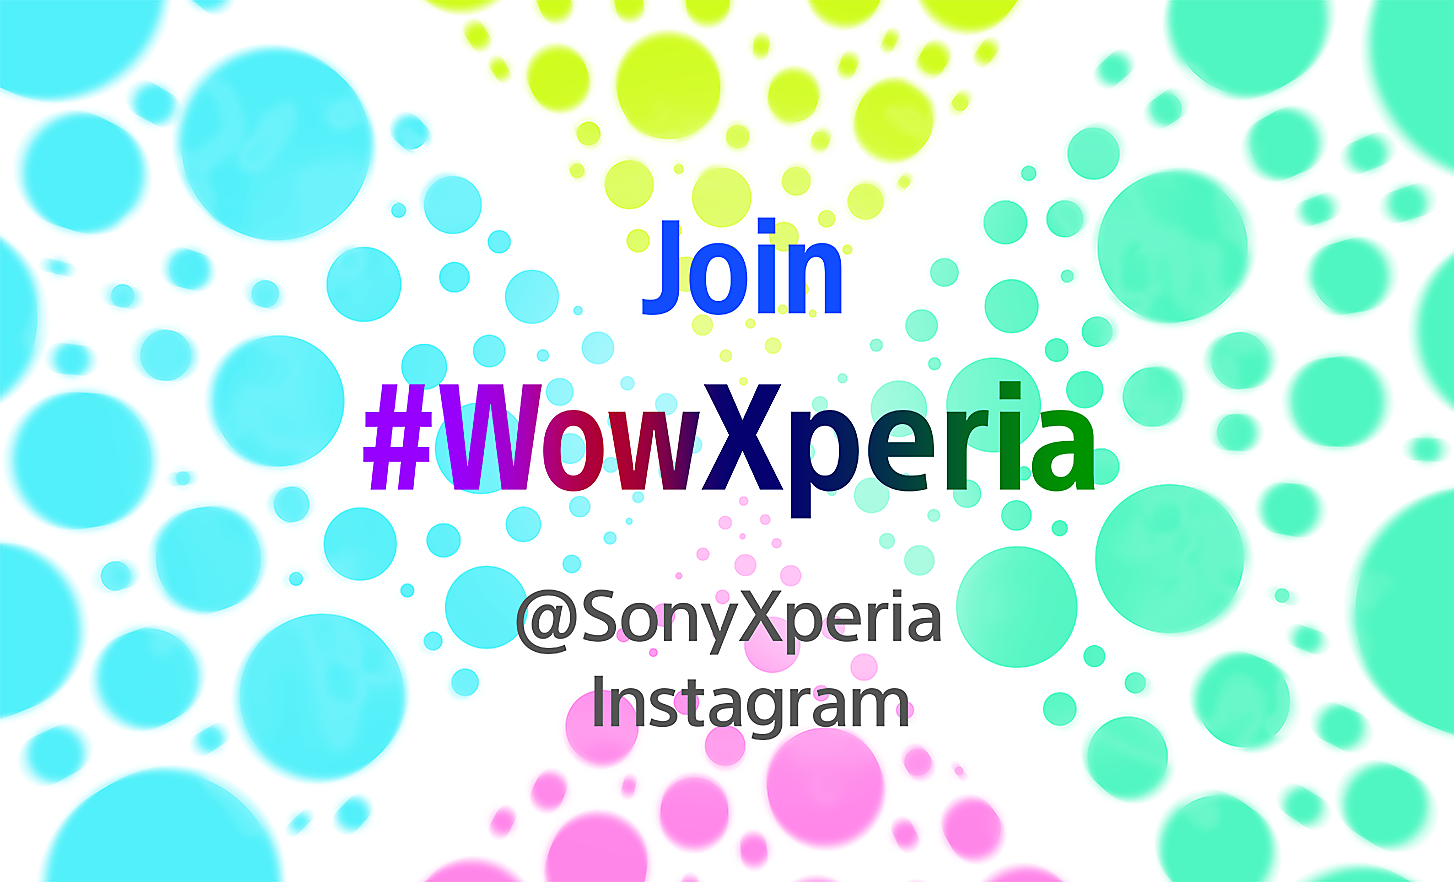 Image of a white background with colourful bubbles and social tags text overlaid on how to join Wow with Xperia